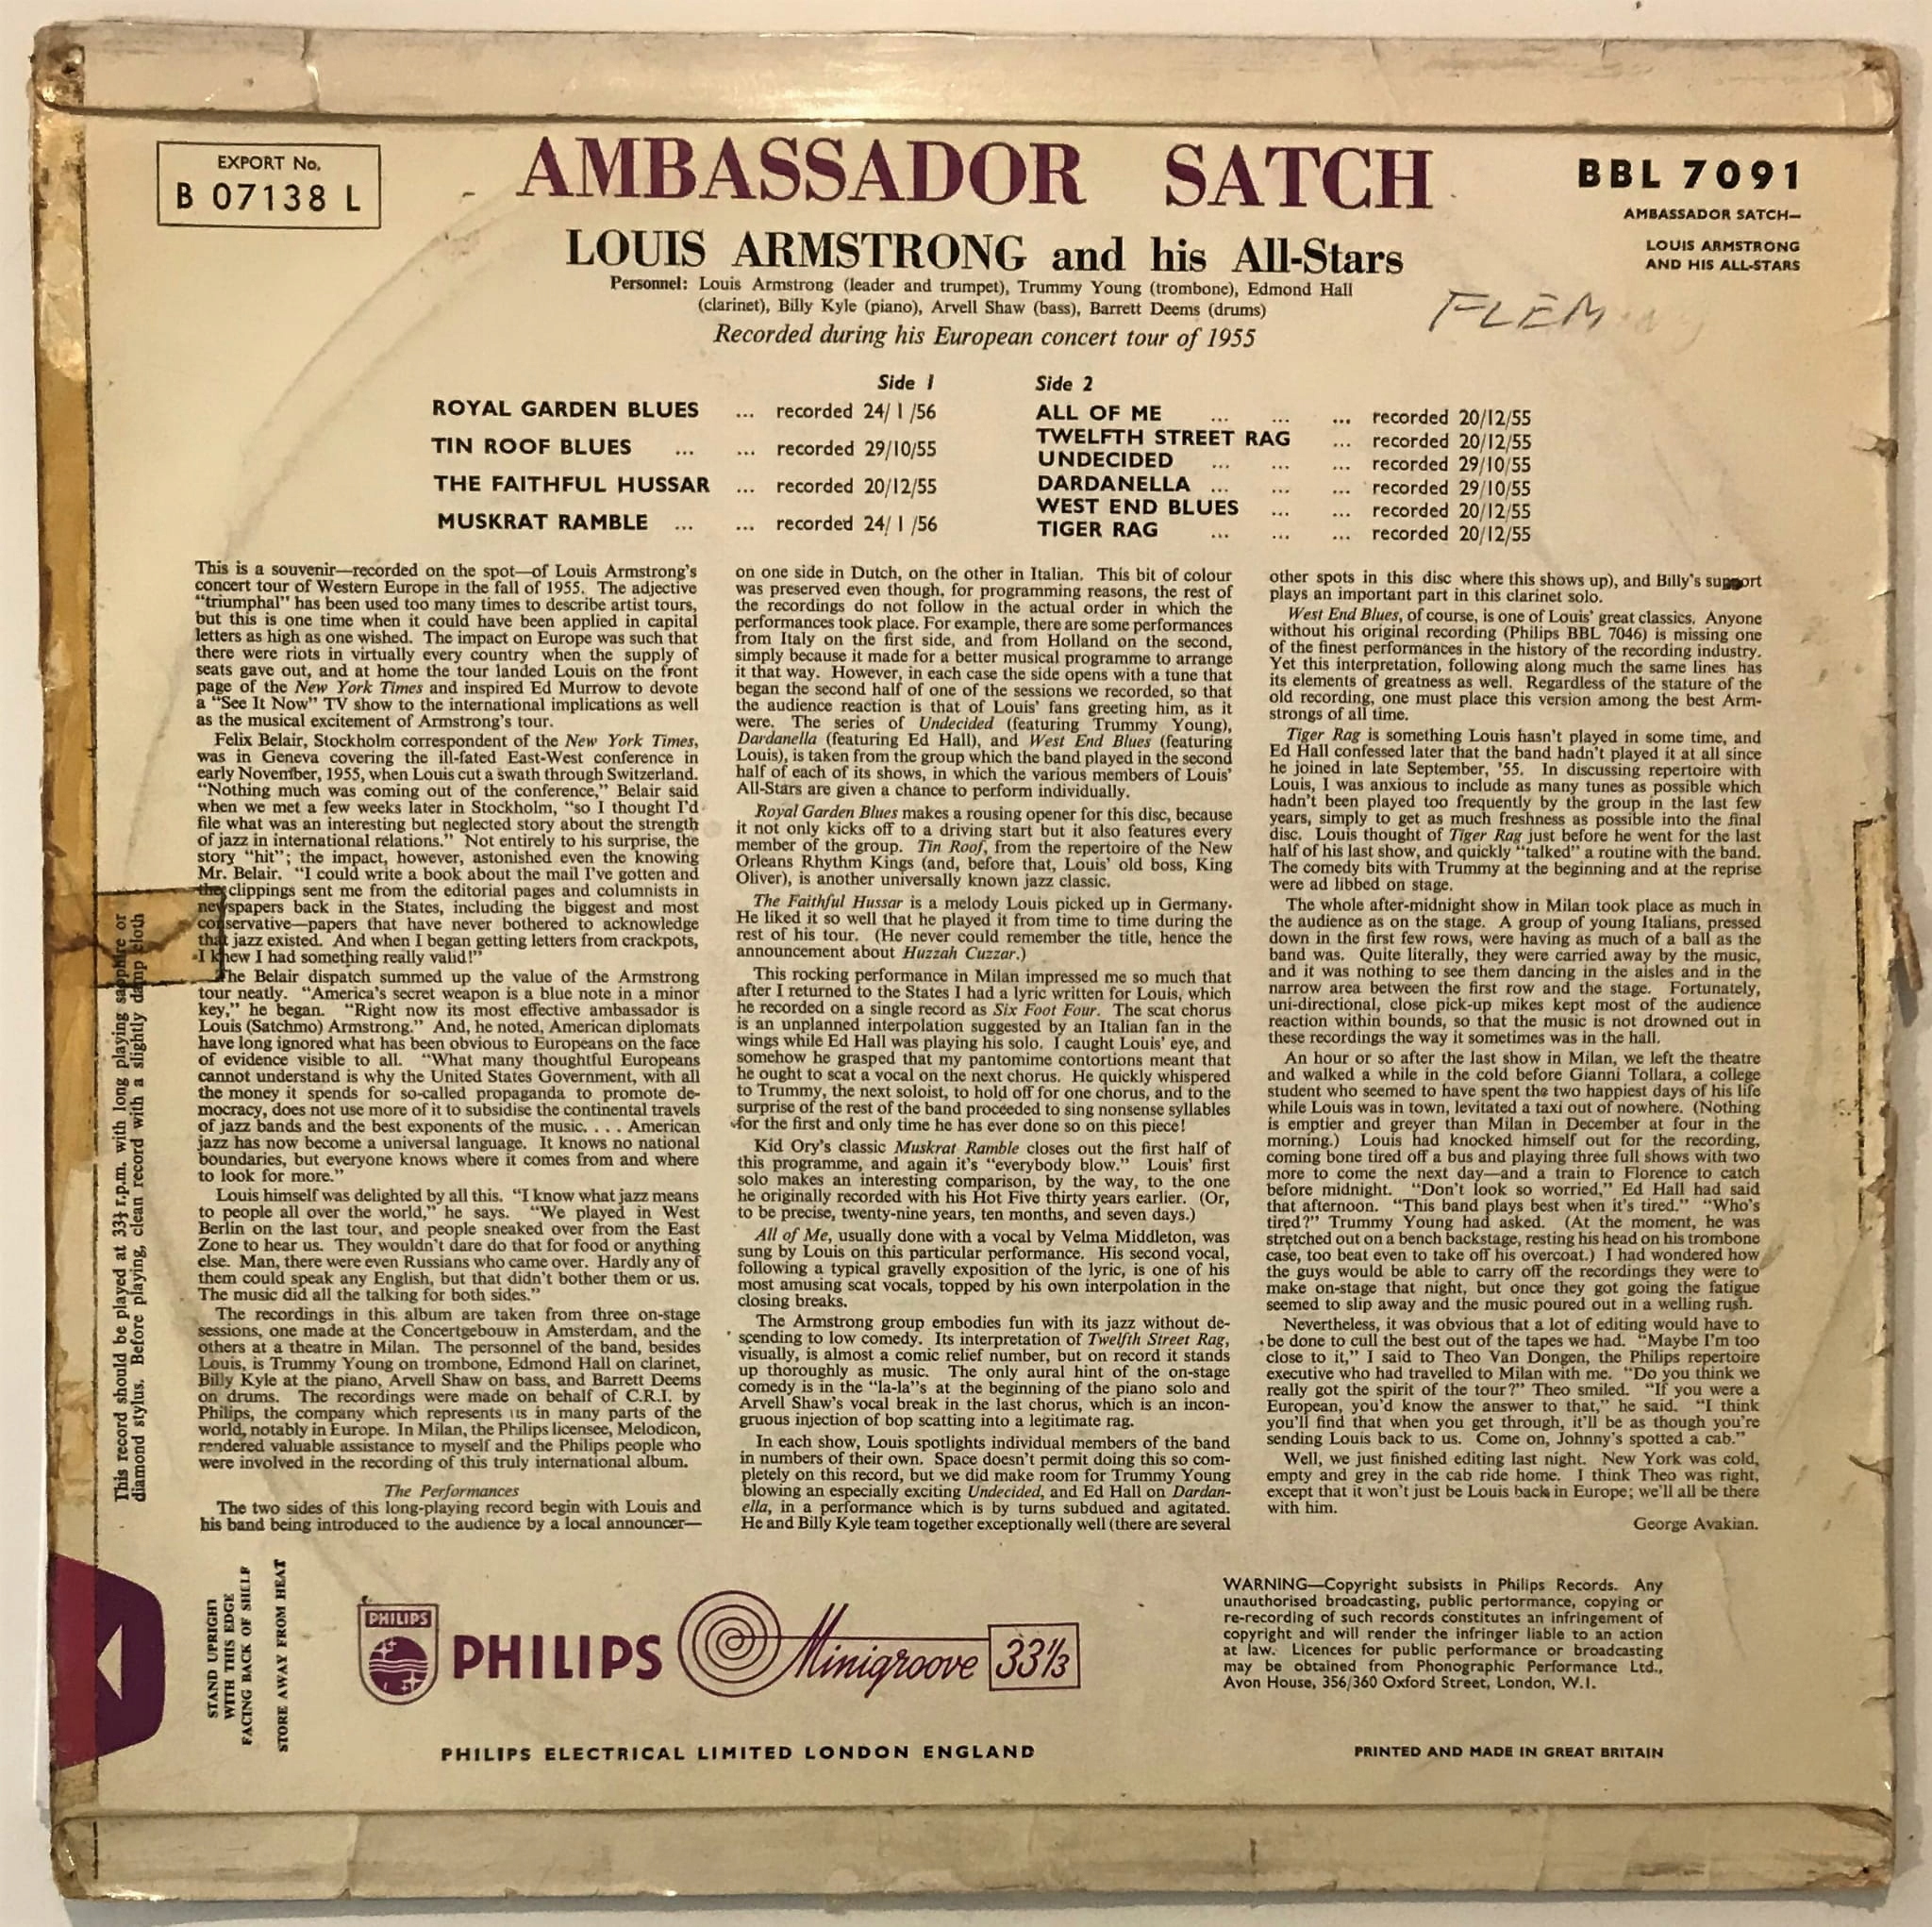 Ambassador Satch - Louis Armstrong And His All-Stars